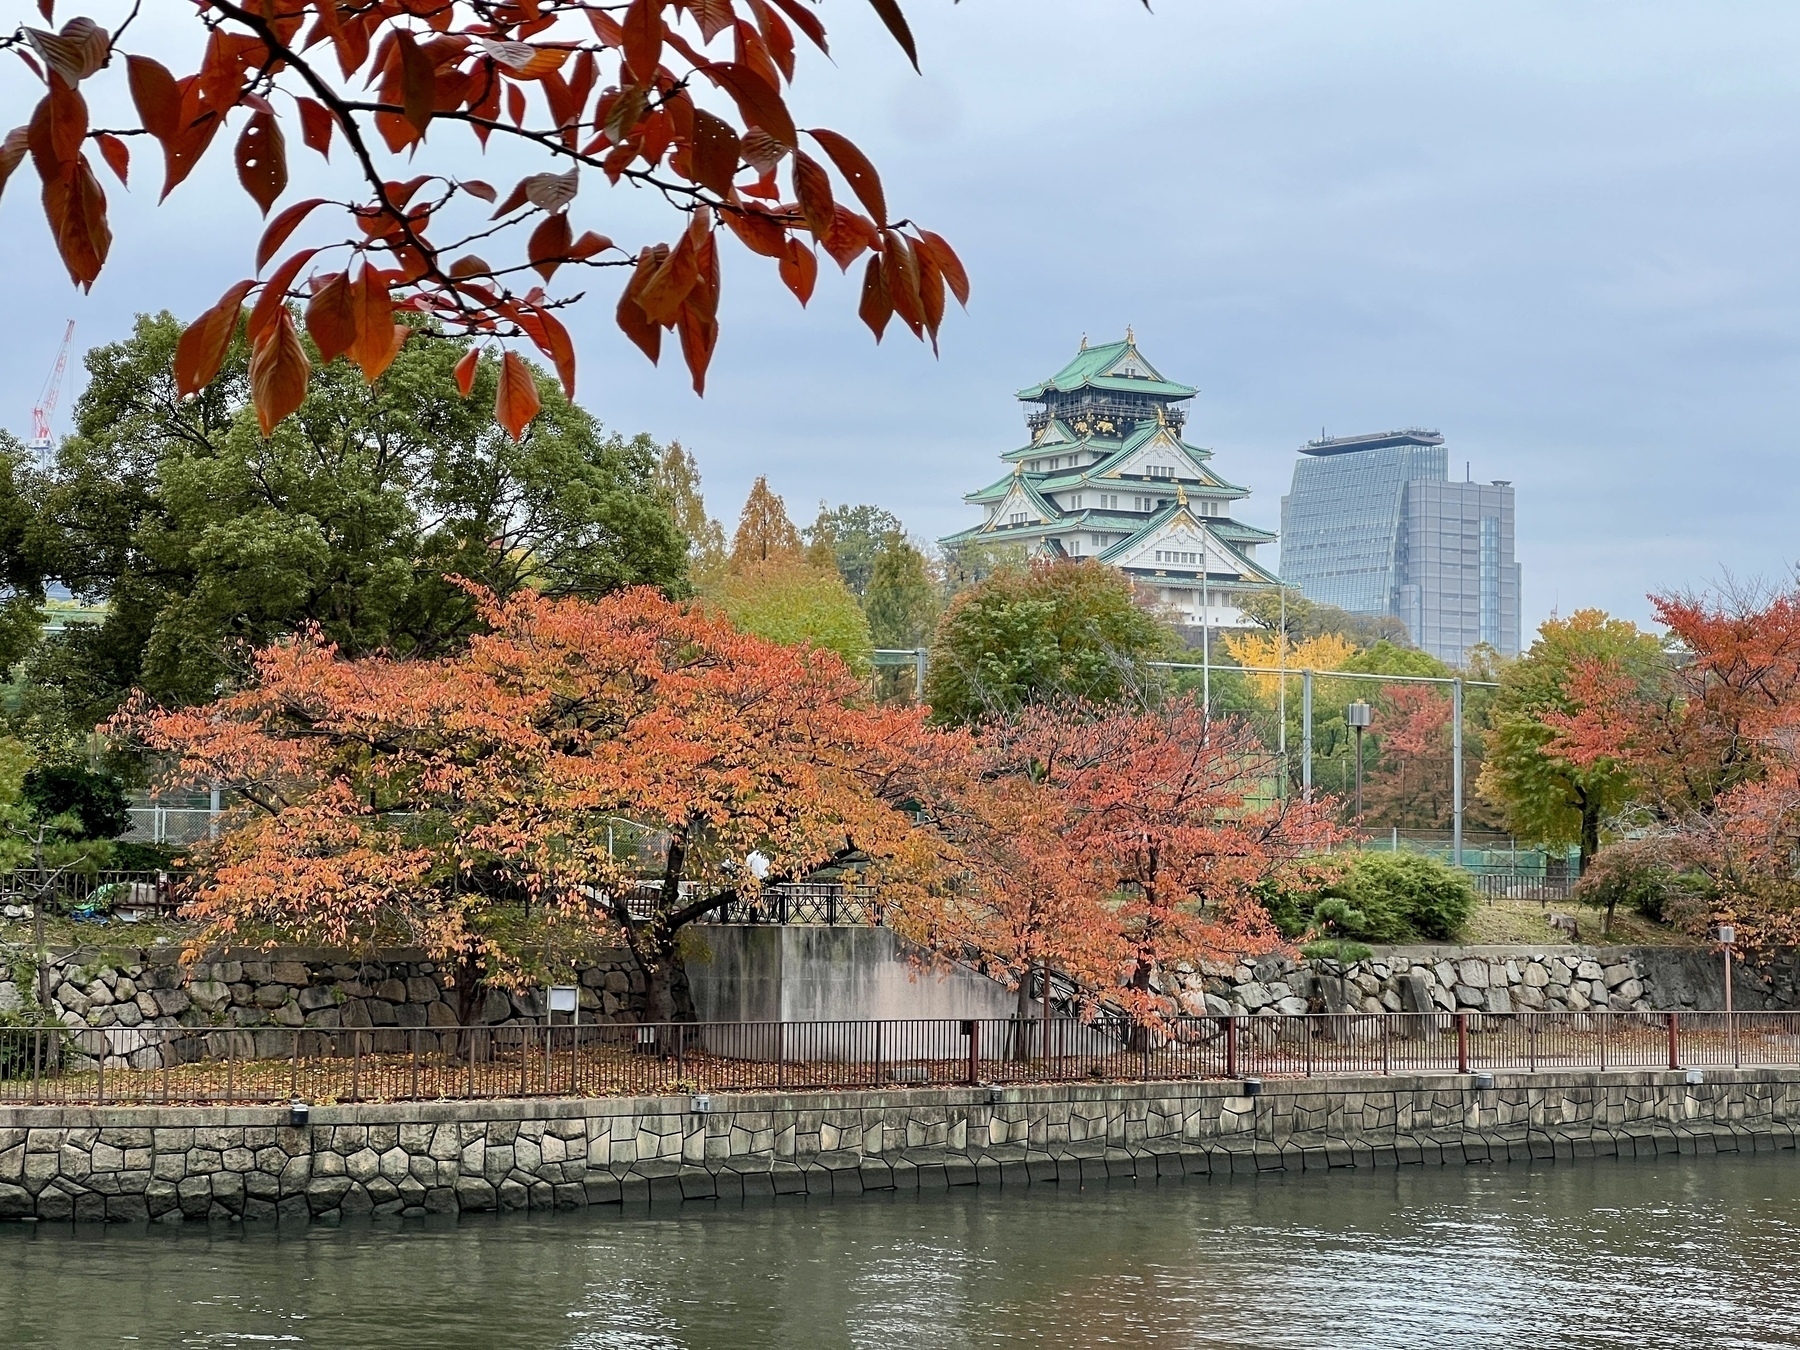 Osaka Castle in the middle distance beyond the moat. There are many turned autumn leaves in red and orange